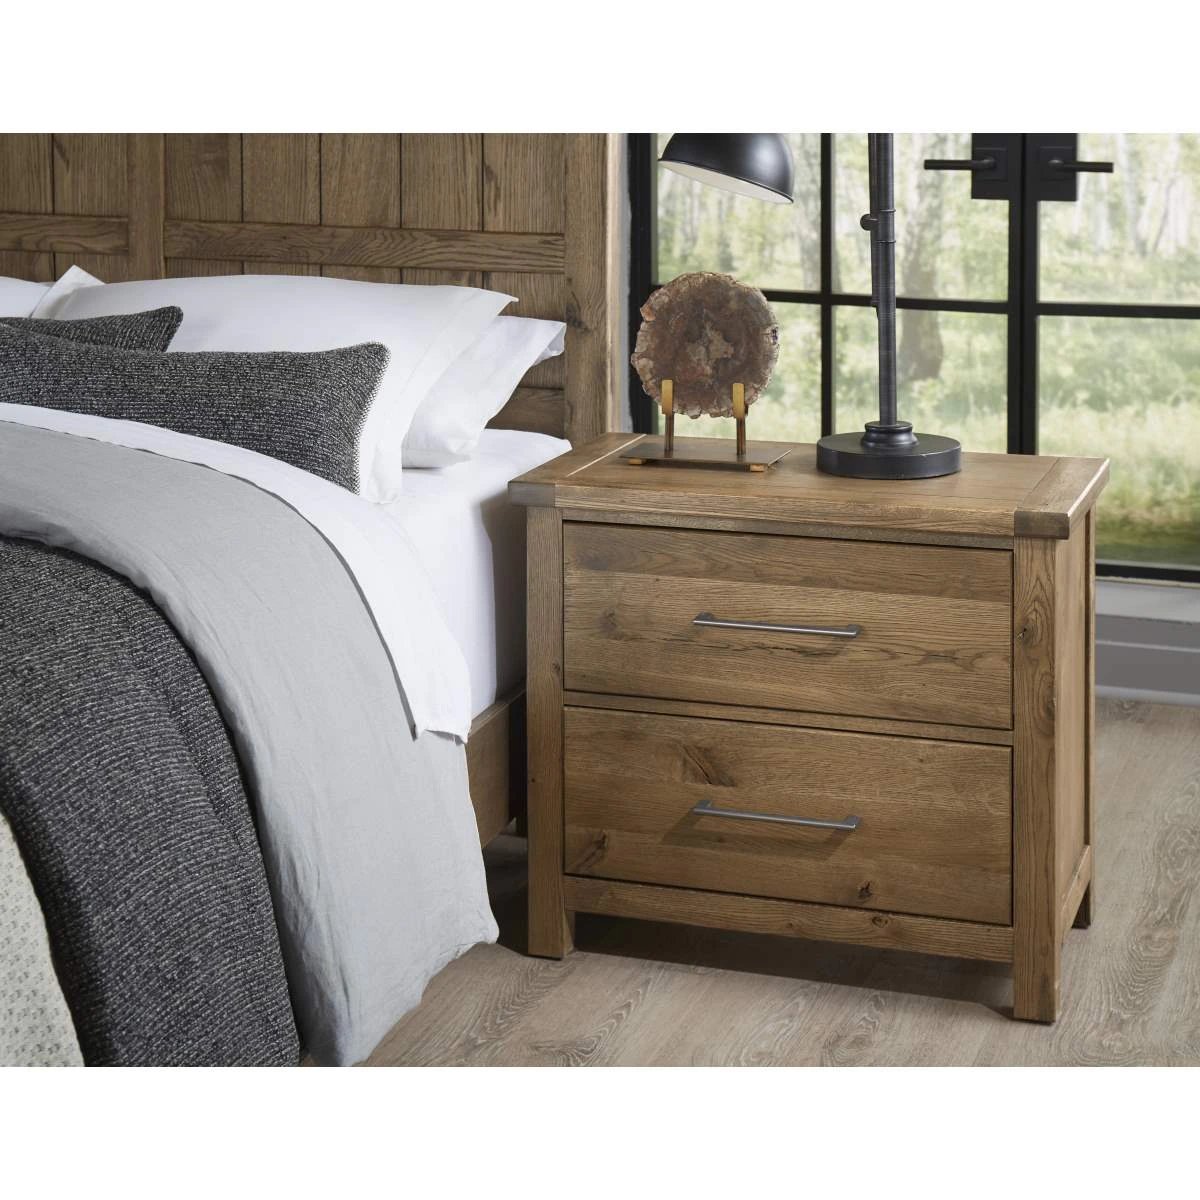 The Vaughan-Basset two-drawer wooden nightstand 